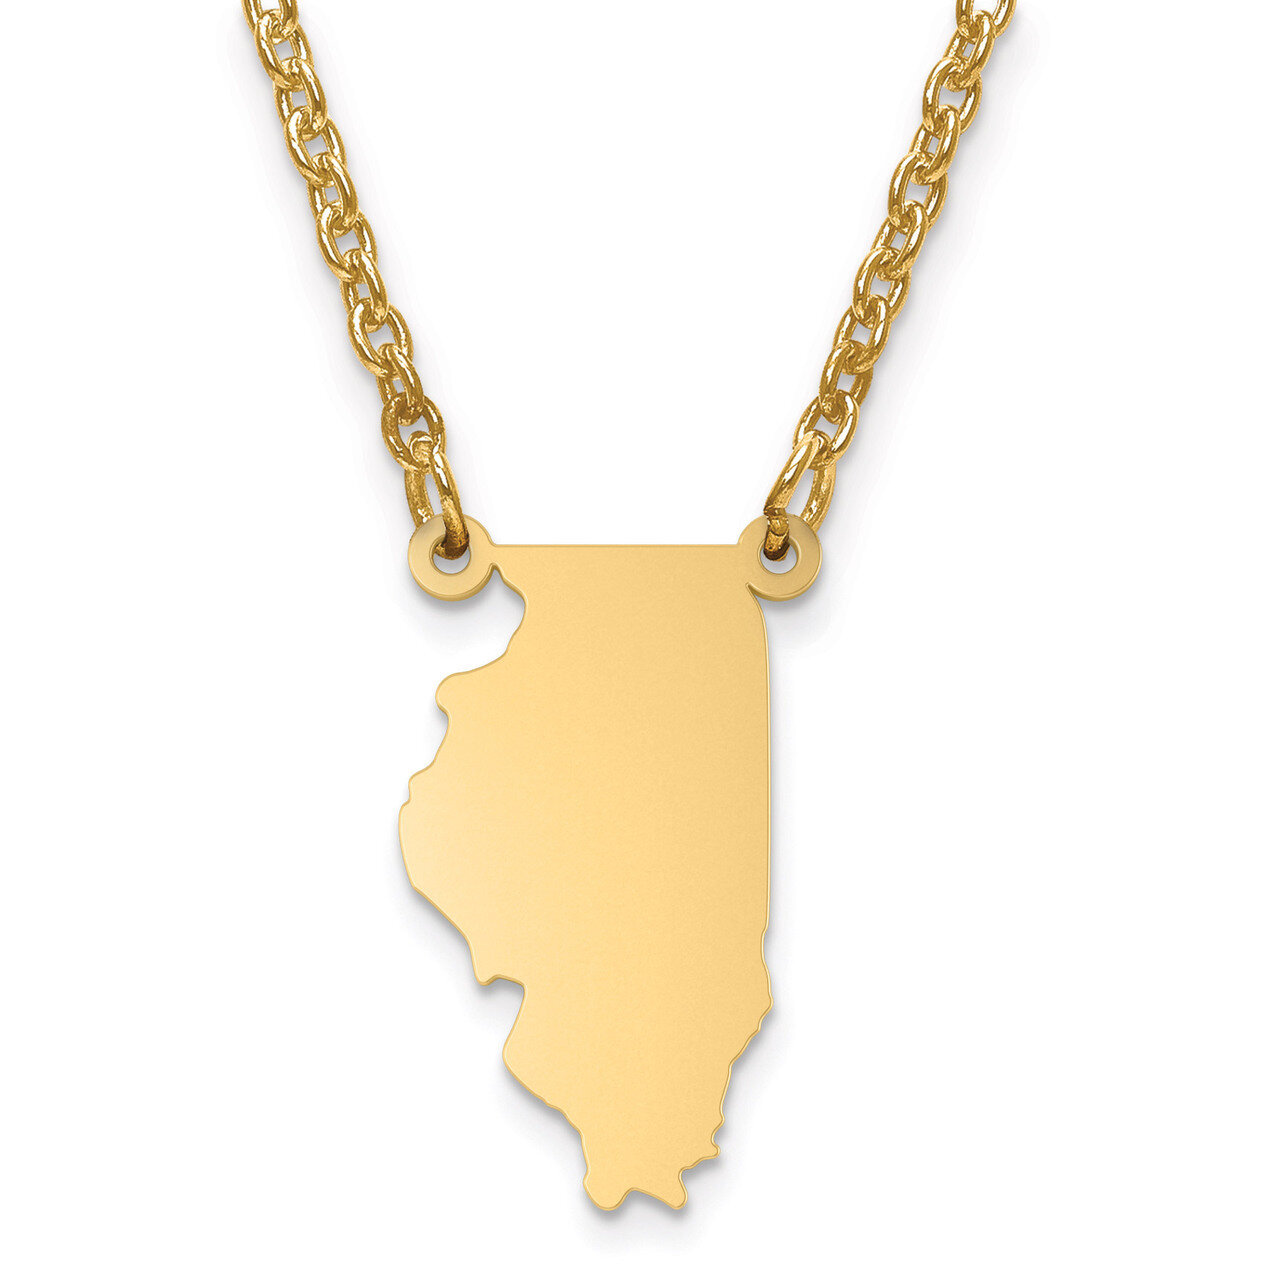 Illinois State Pendant with Chain Engravable Gold-plated on Sterling Silver